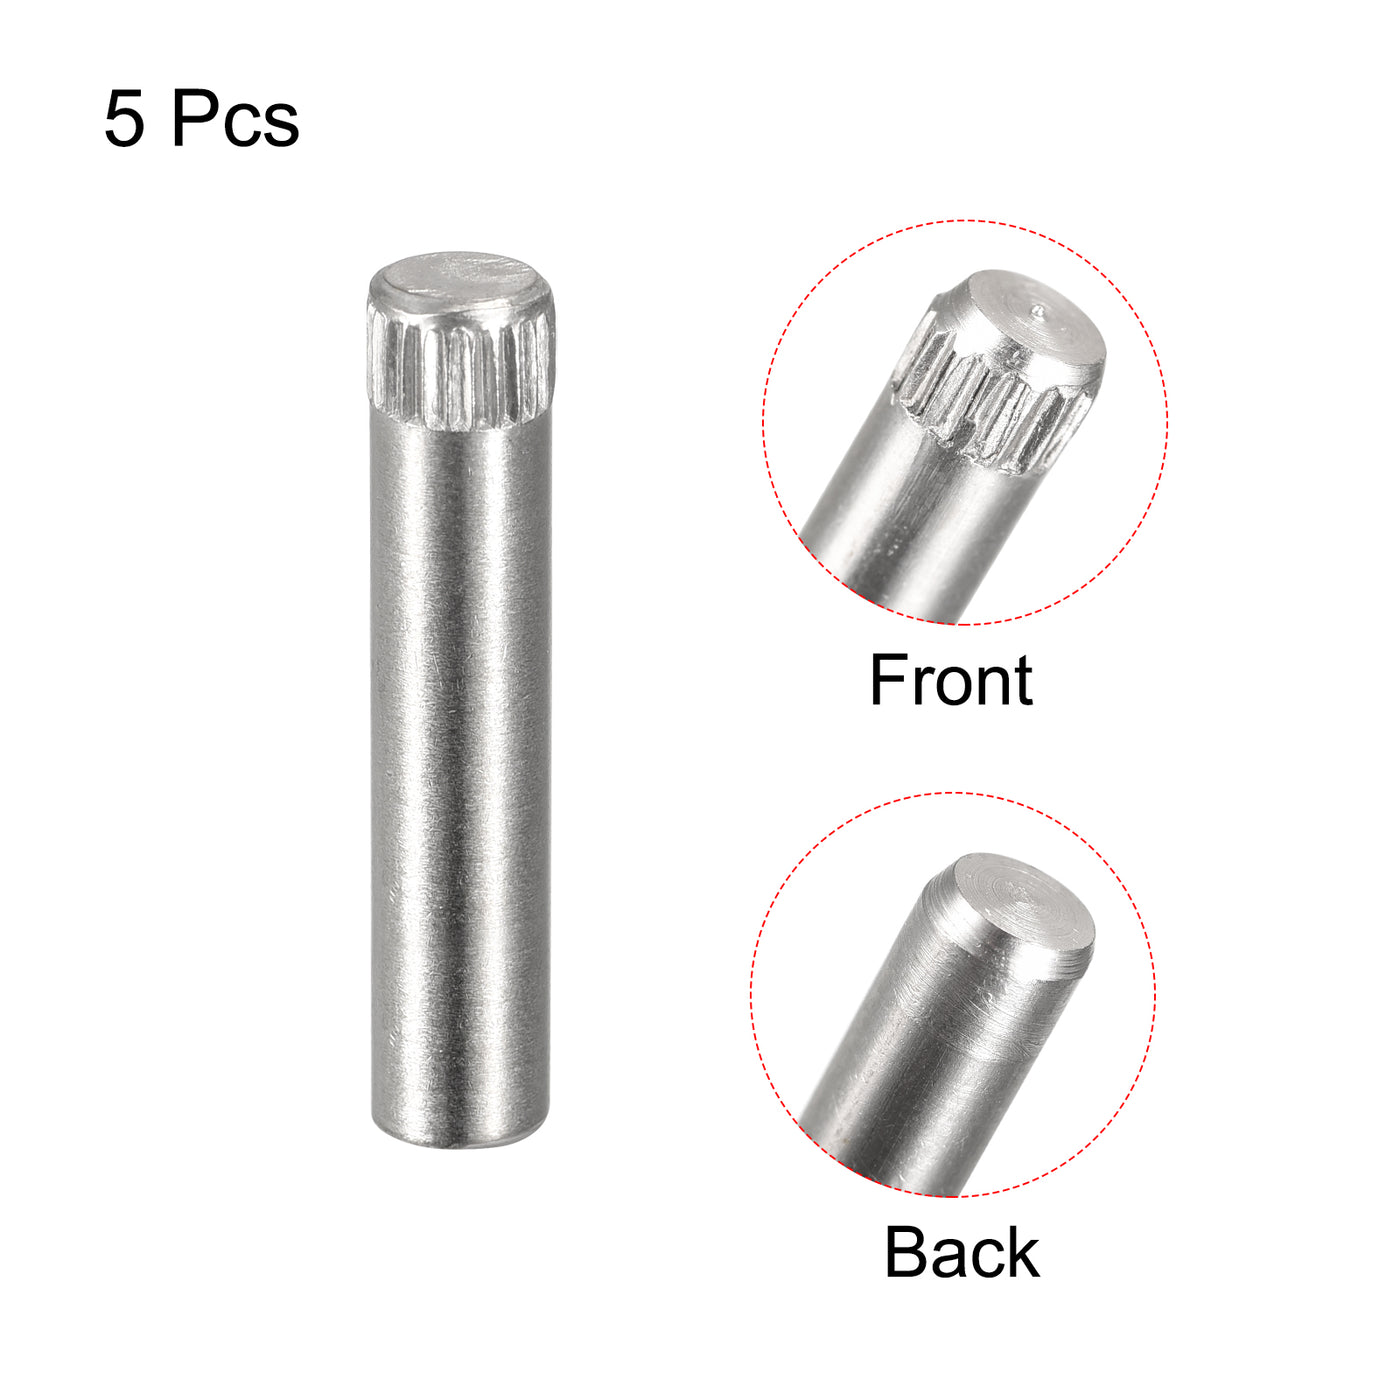 uxcell Uxcell 6x30mm 304 Stainless Steel Dowel Pins, 5Pcs Knurled Head Flat End Dowel Pin